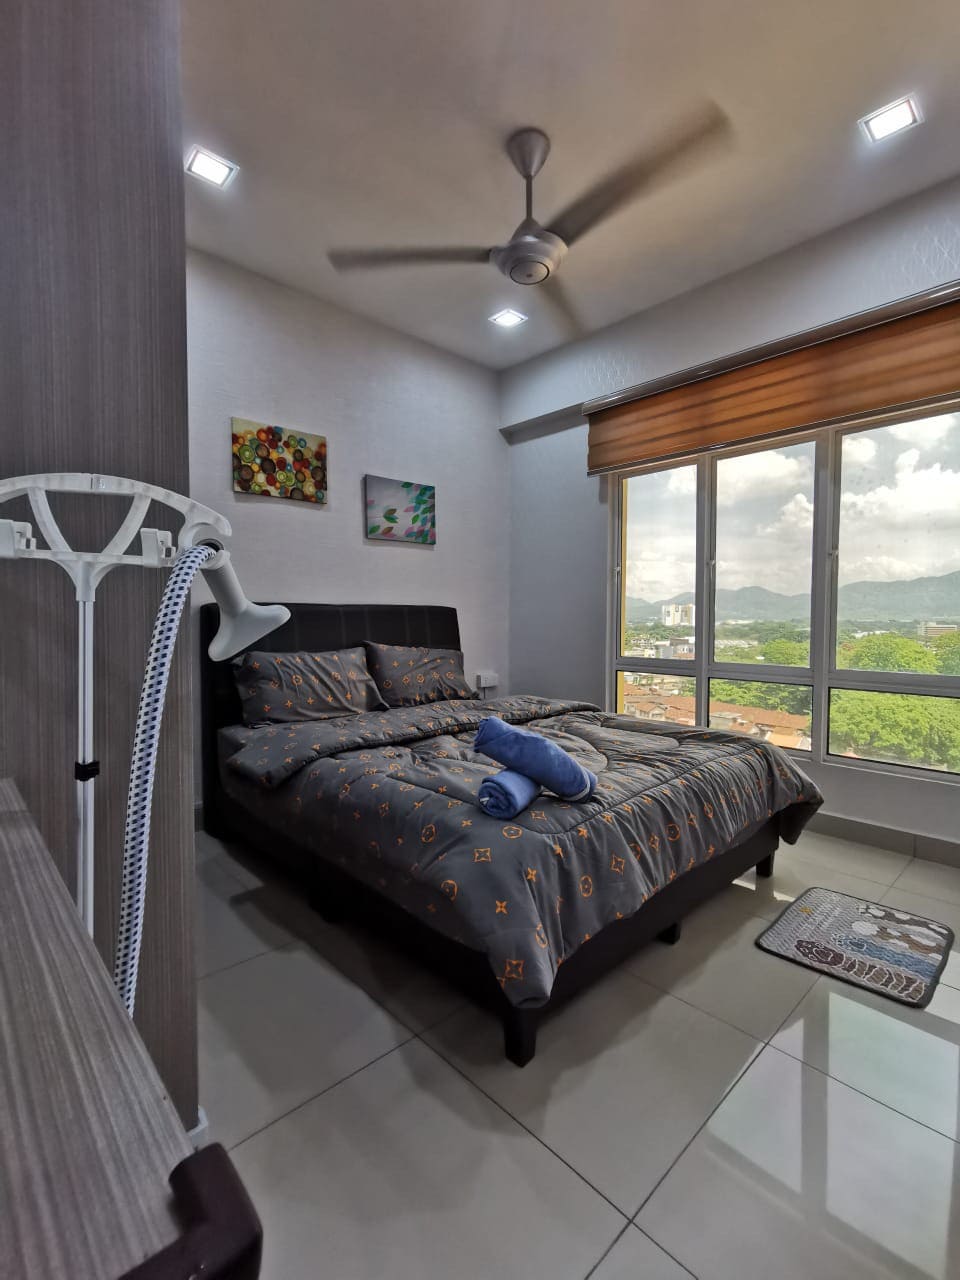 MyTown Homestay Majestic Ipoh 2BR 6 Pax